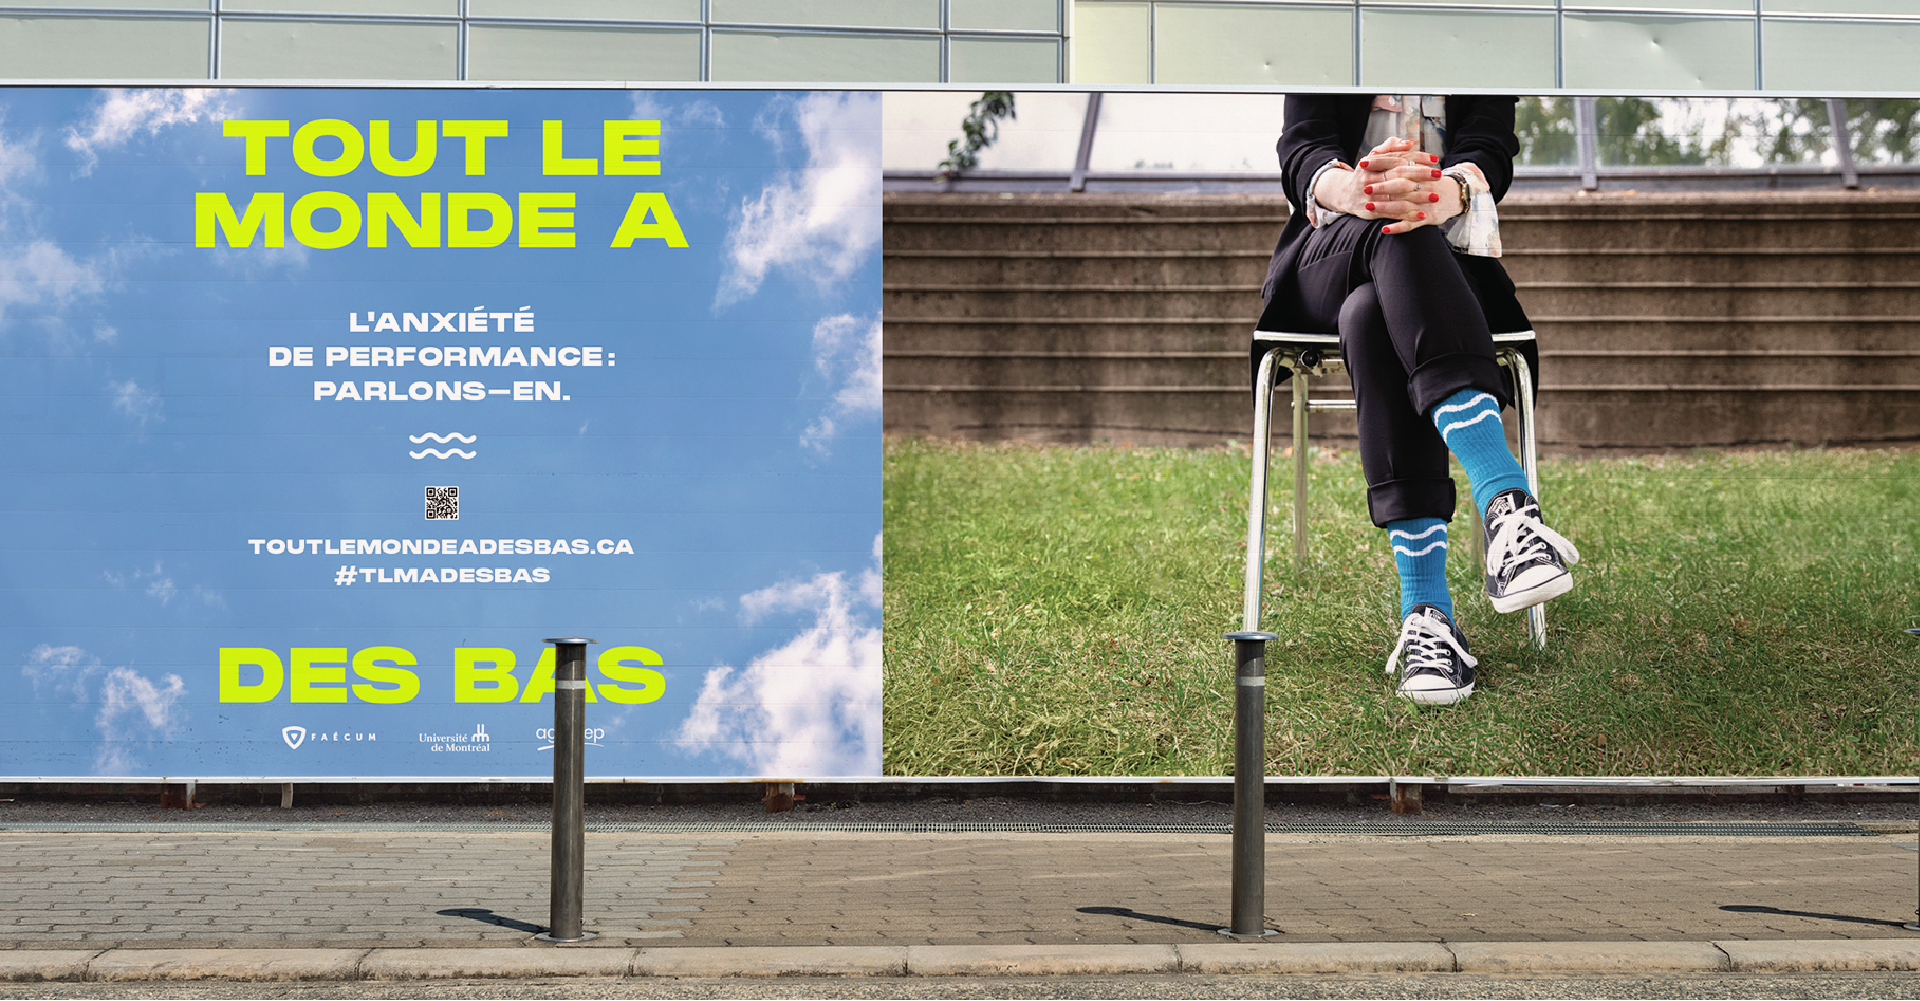 Out-of-home ad, with a tagline that reads: Tout le monde a des bas. Let's talk about performance anxiety.